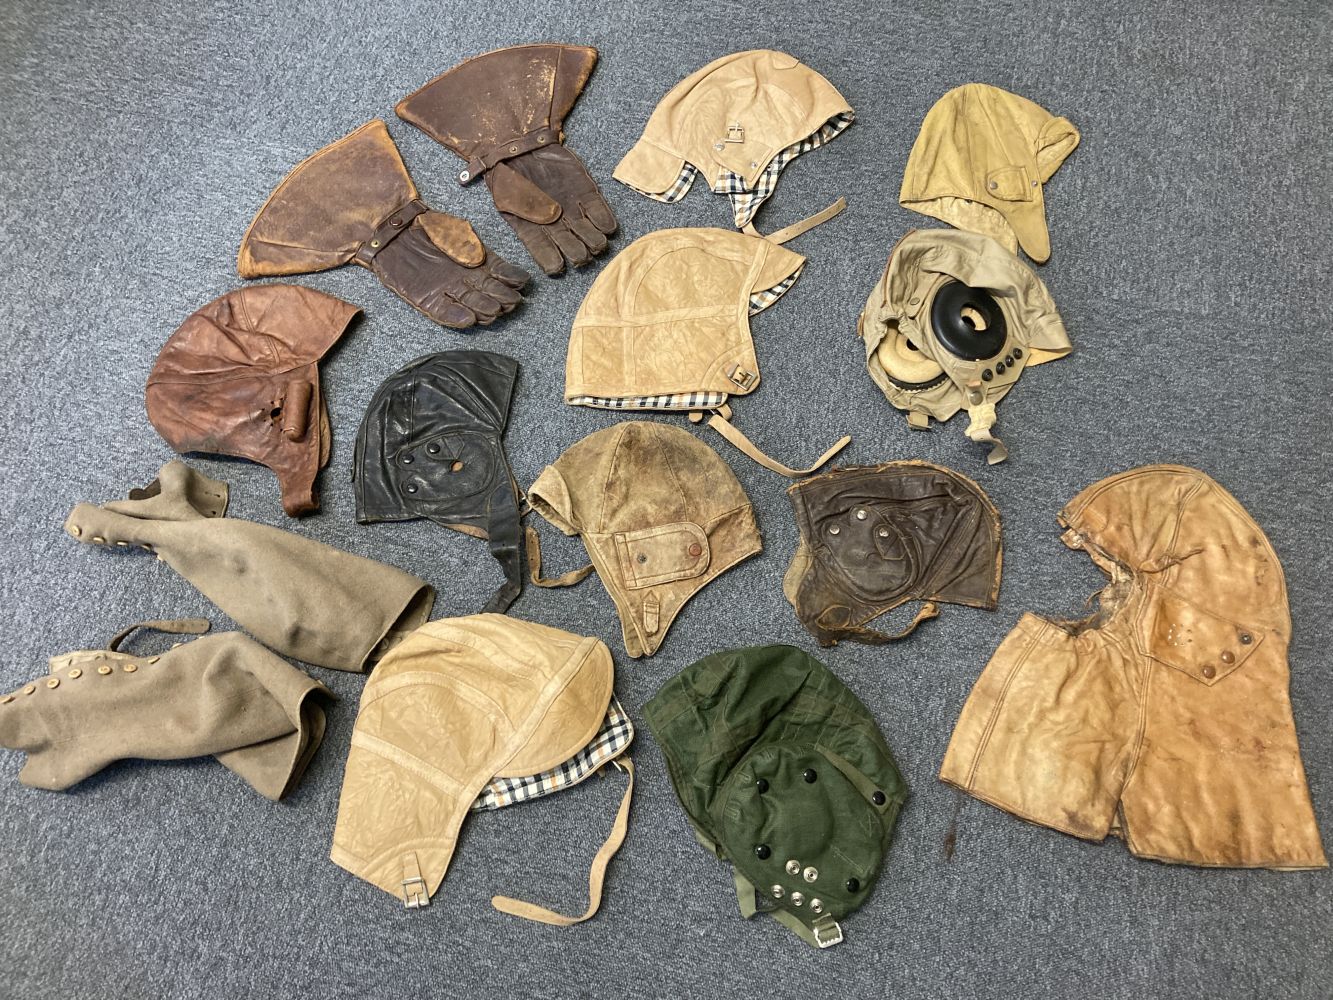 Flying Helmets. WWI Royal Flying Corps cowl flying helmet, circa 1915 and other helmets